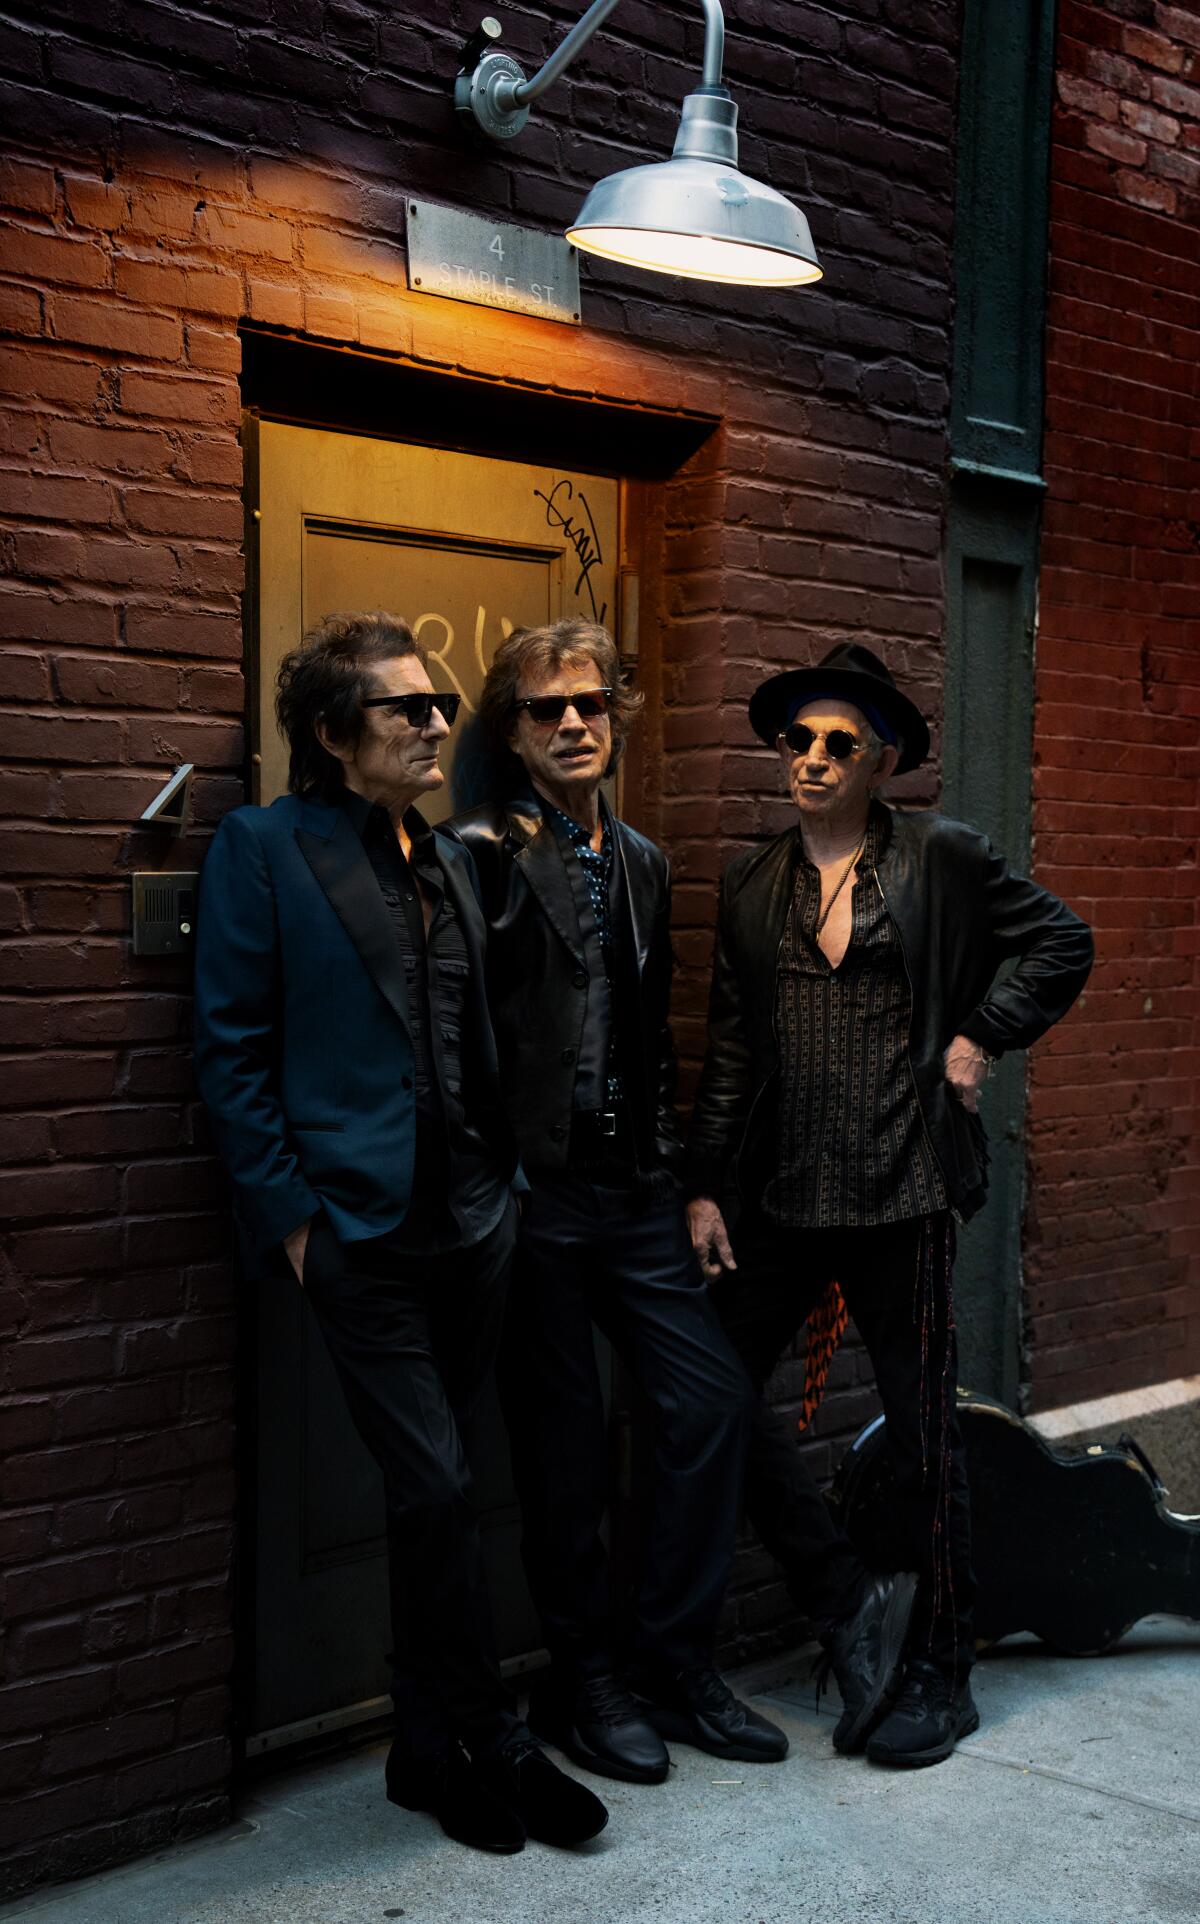 Three old rock musicians standing in front of a brick wall